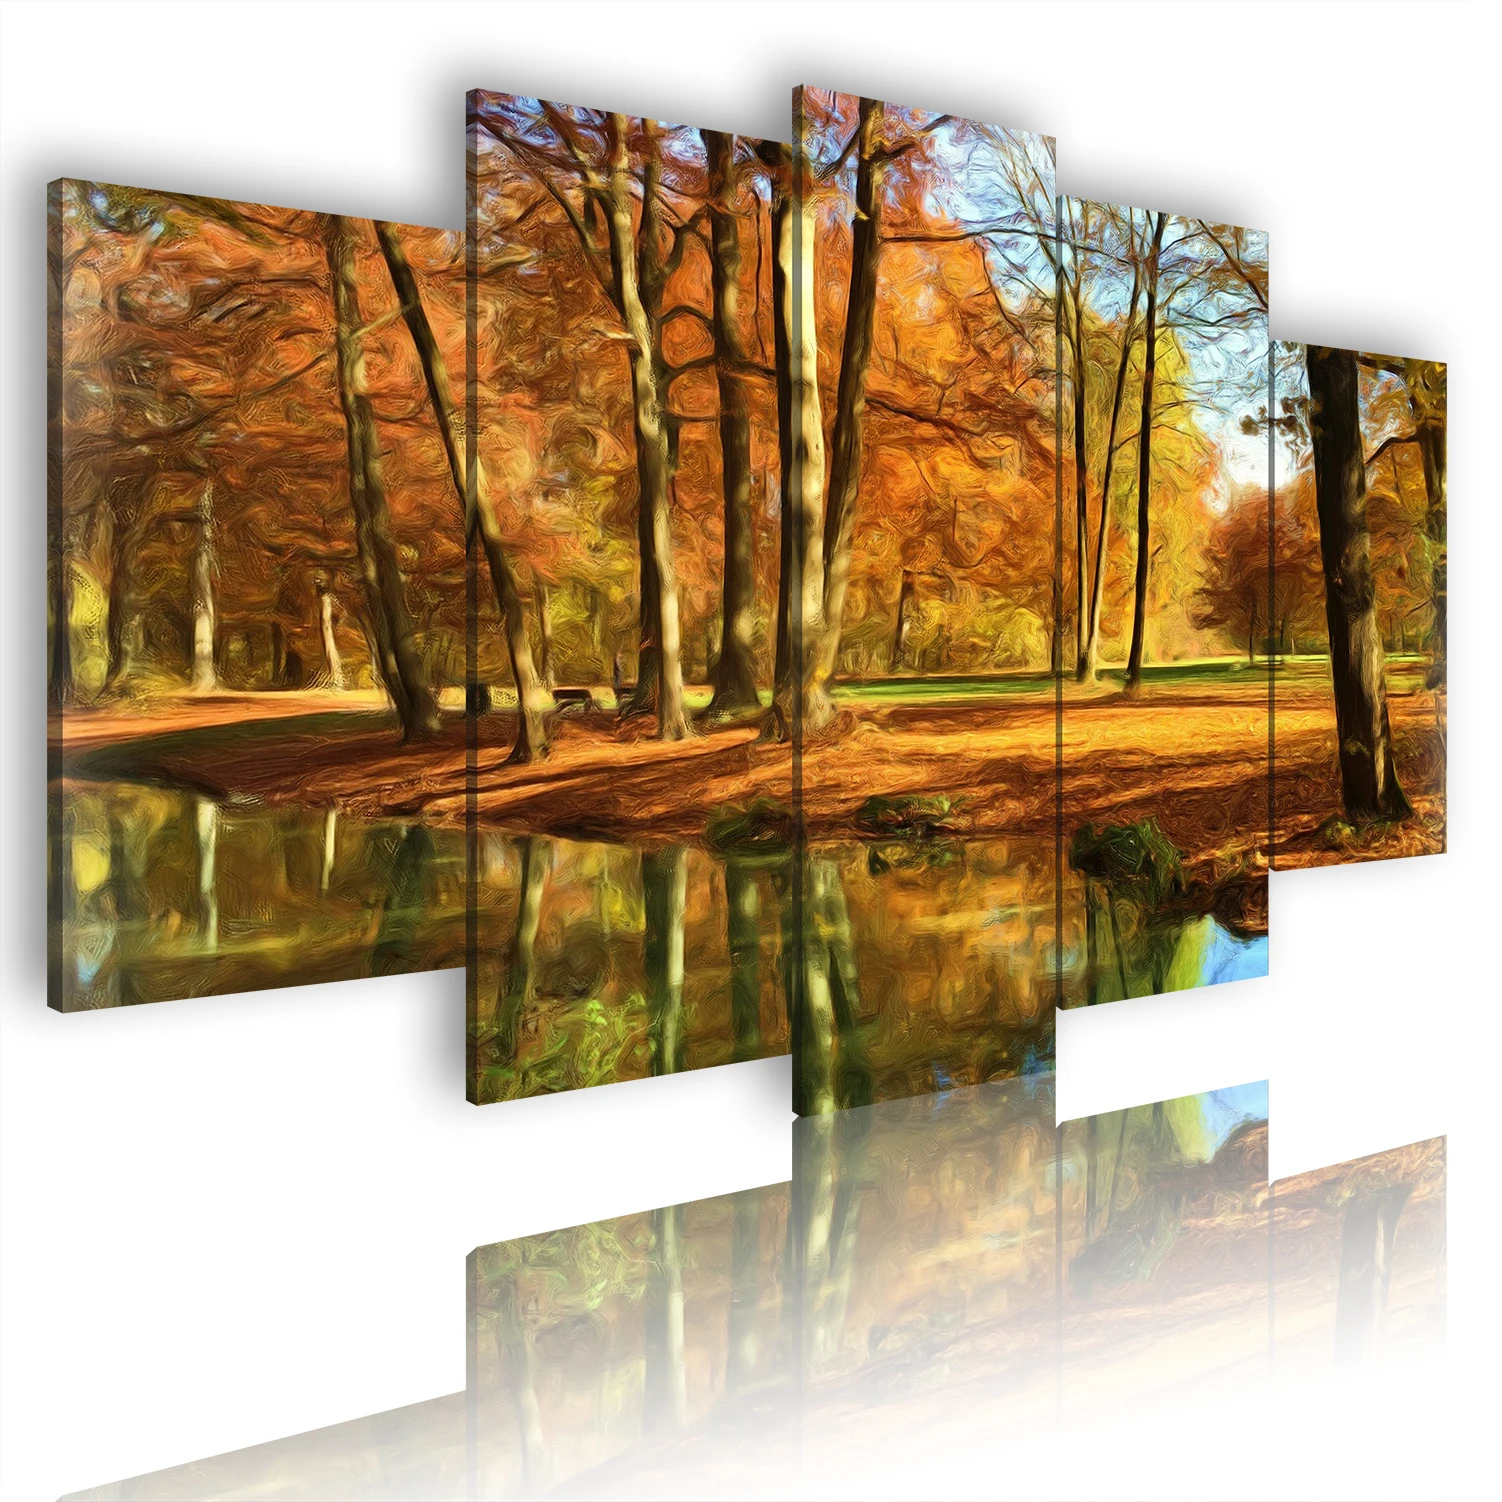 

Painting Oil Picture Abstract Framed Beautiful Scenery Modern Decor Landscape Decoration Living Room Wall Art